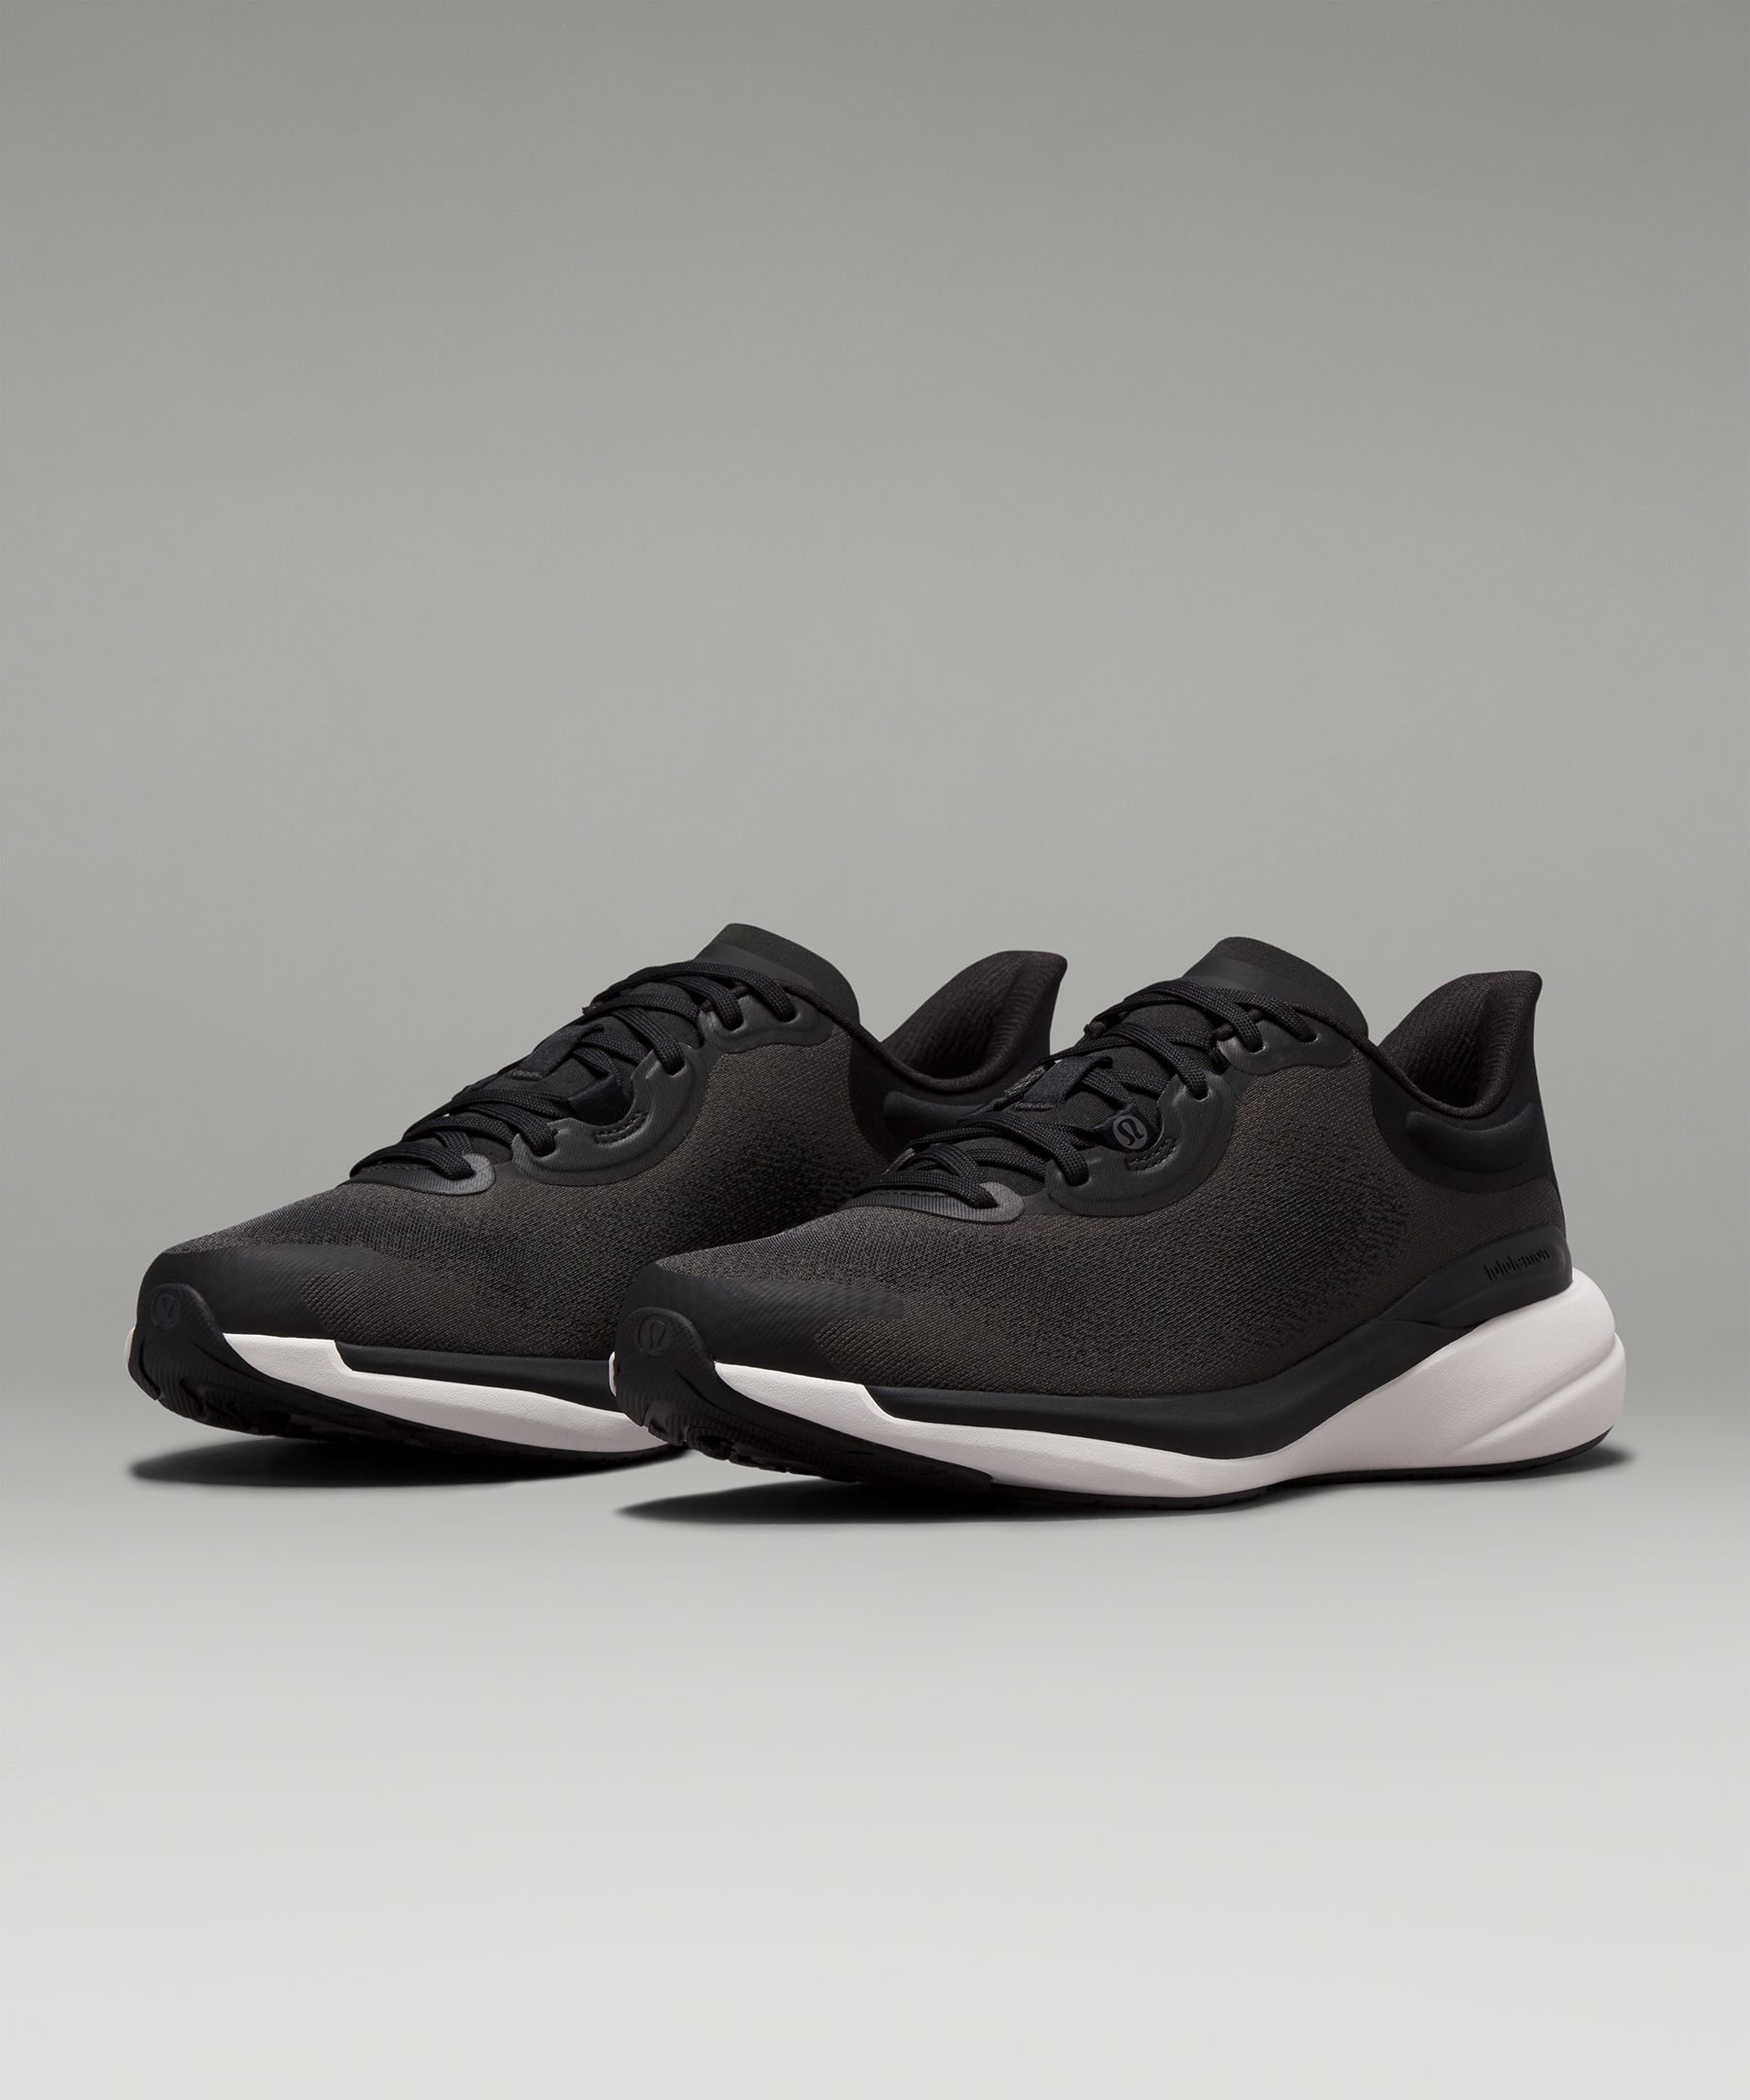 Lululemon Chargefeel 2 Low  Workout Shoes